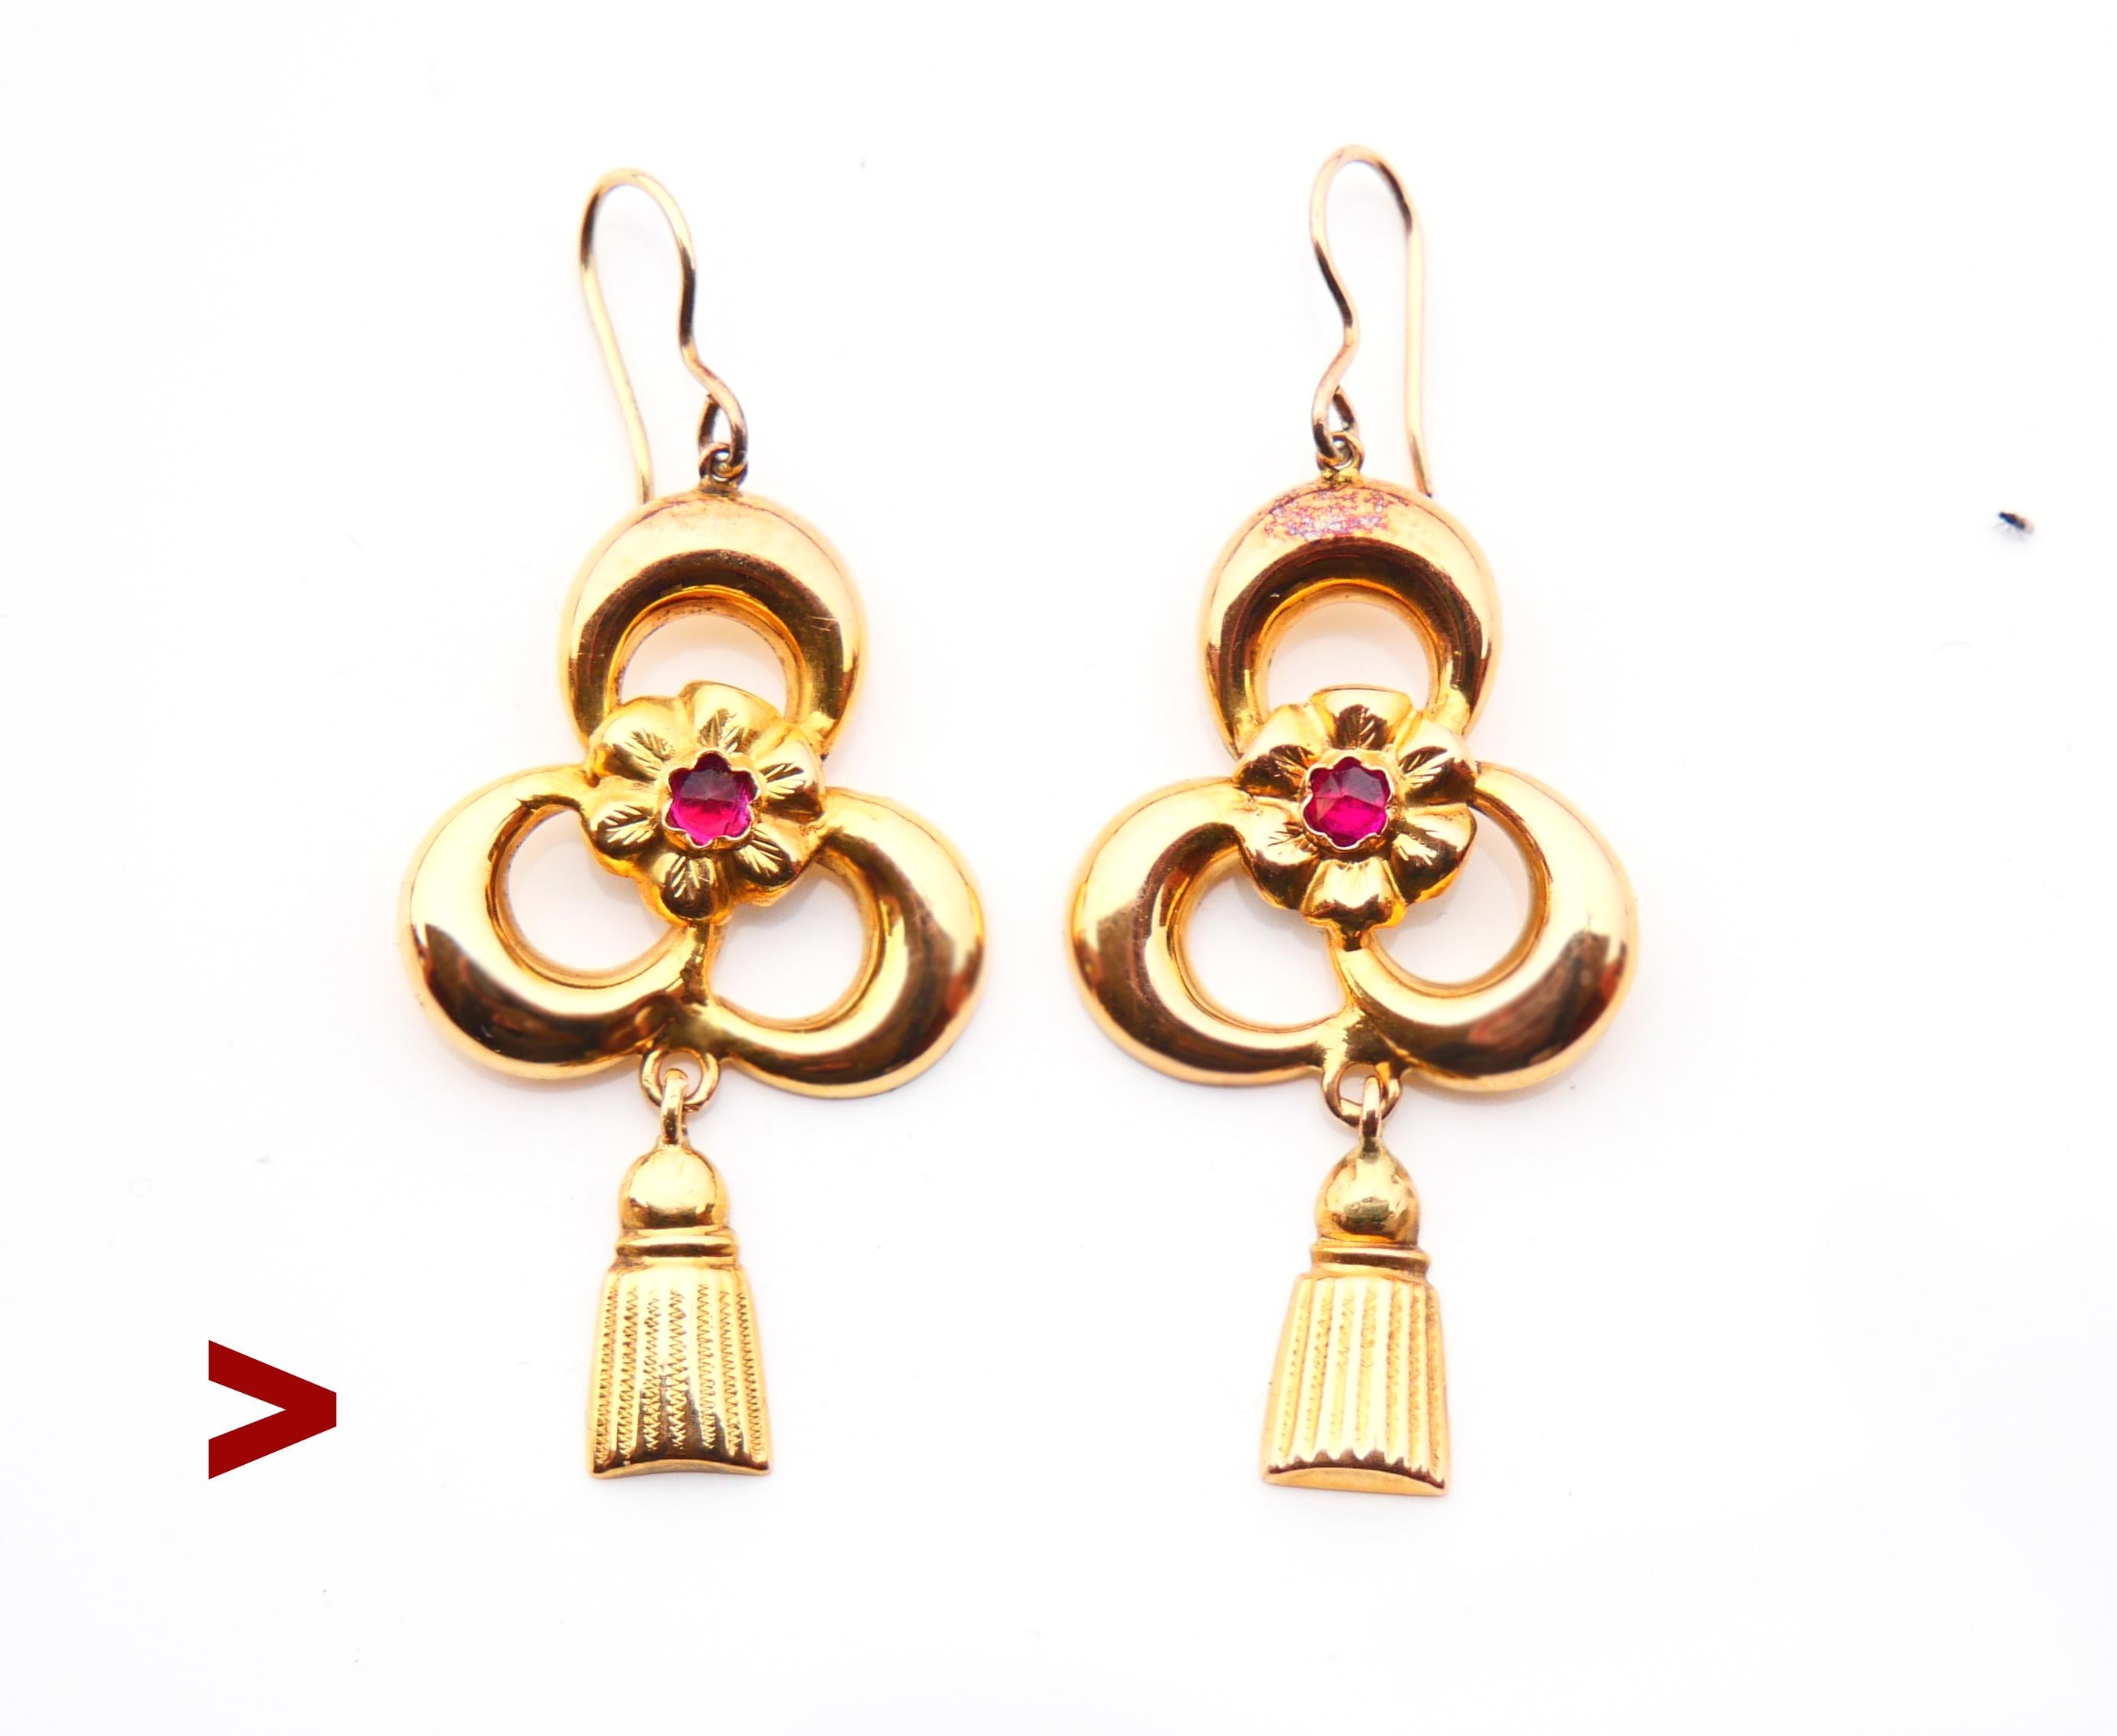 A pair of Art Nouveau period 108 years old Gold earrings decorated with flowers ans rose cut Rubies. Freely suspended main pendants and tassel shaped dangles.

Each earring is 57 mm long suspended including the hook x 24 mm wide x 4 mm deep. Weight: